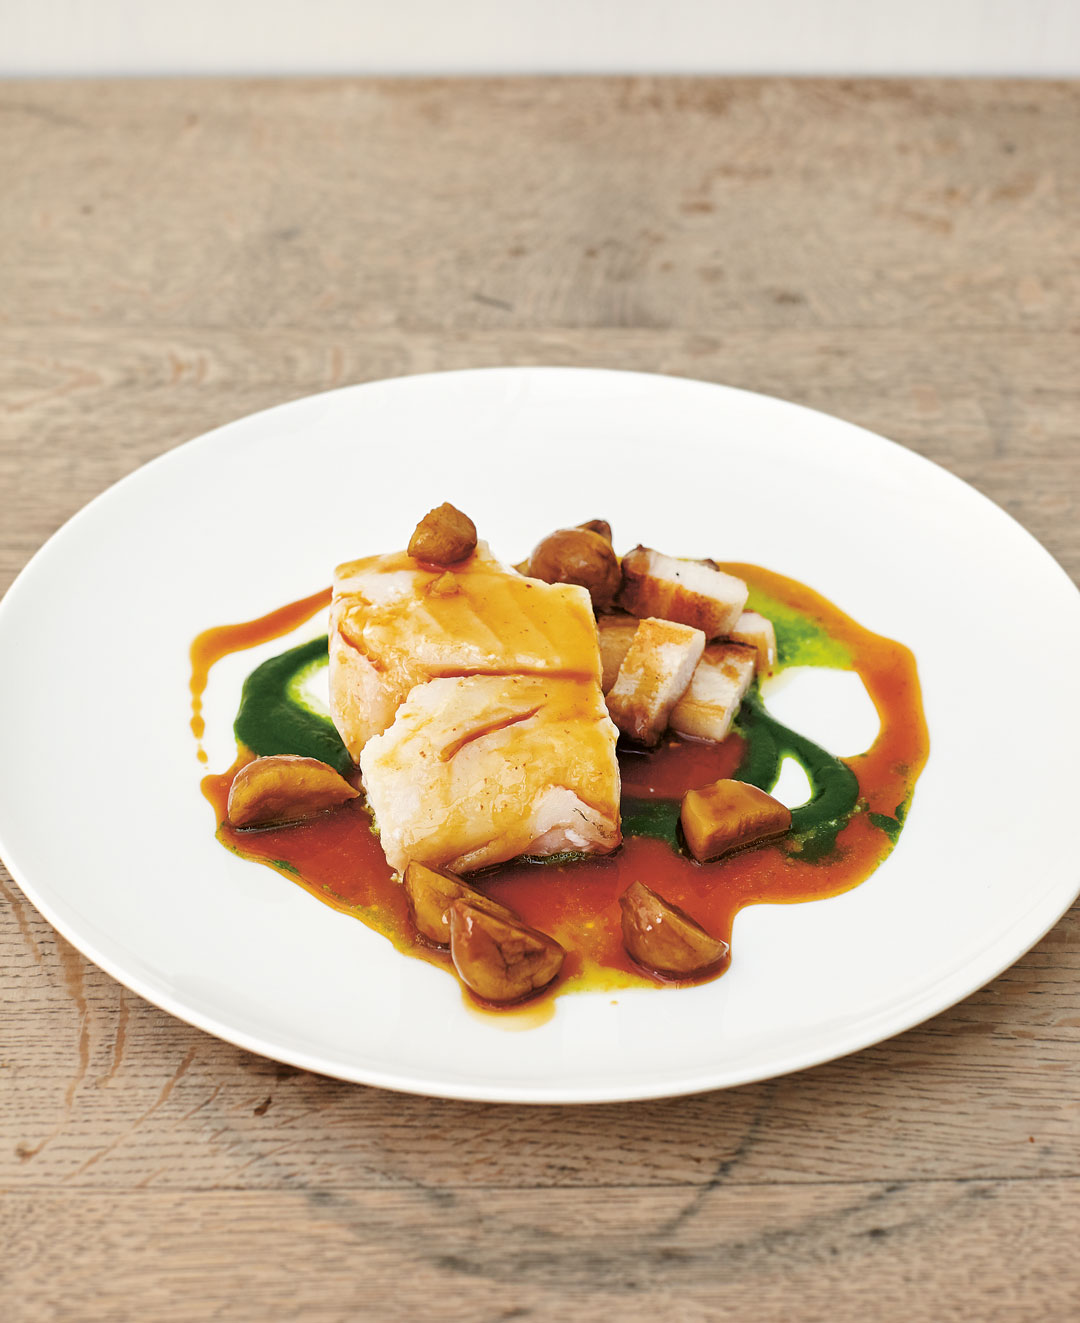 Baked cod with chestnuts, parsley and bacon, as featured in The Sportsman